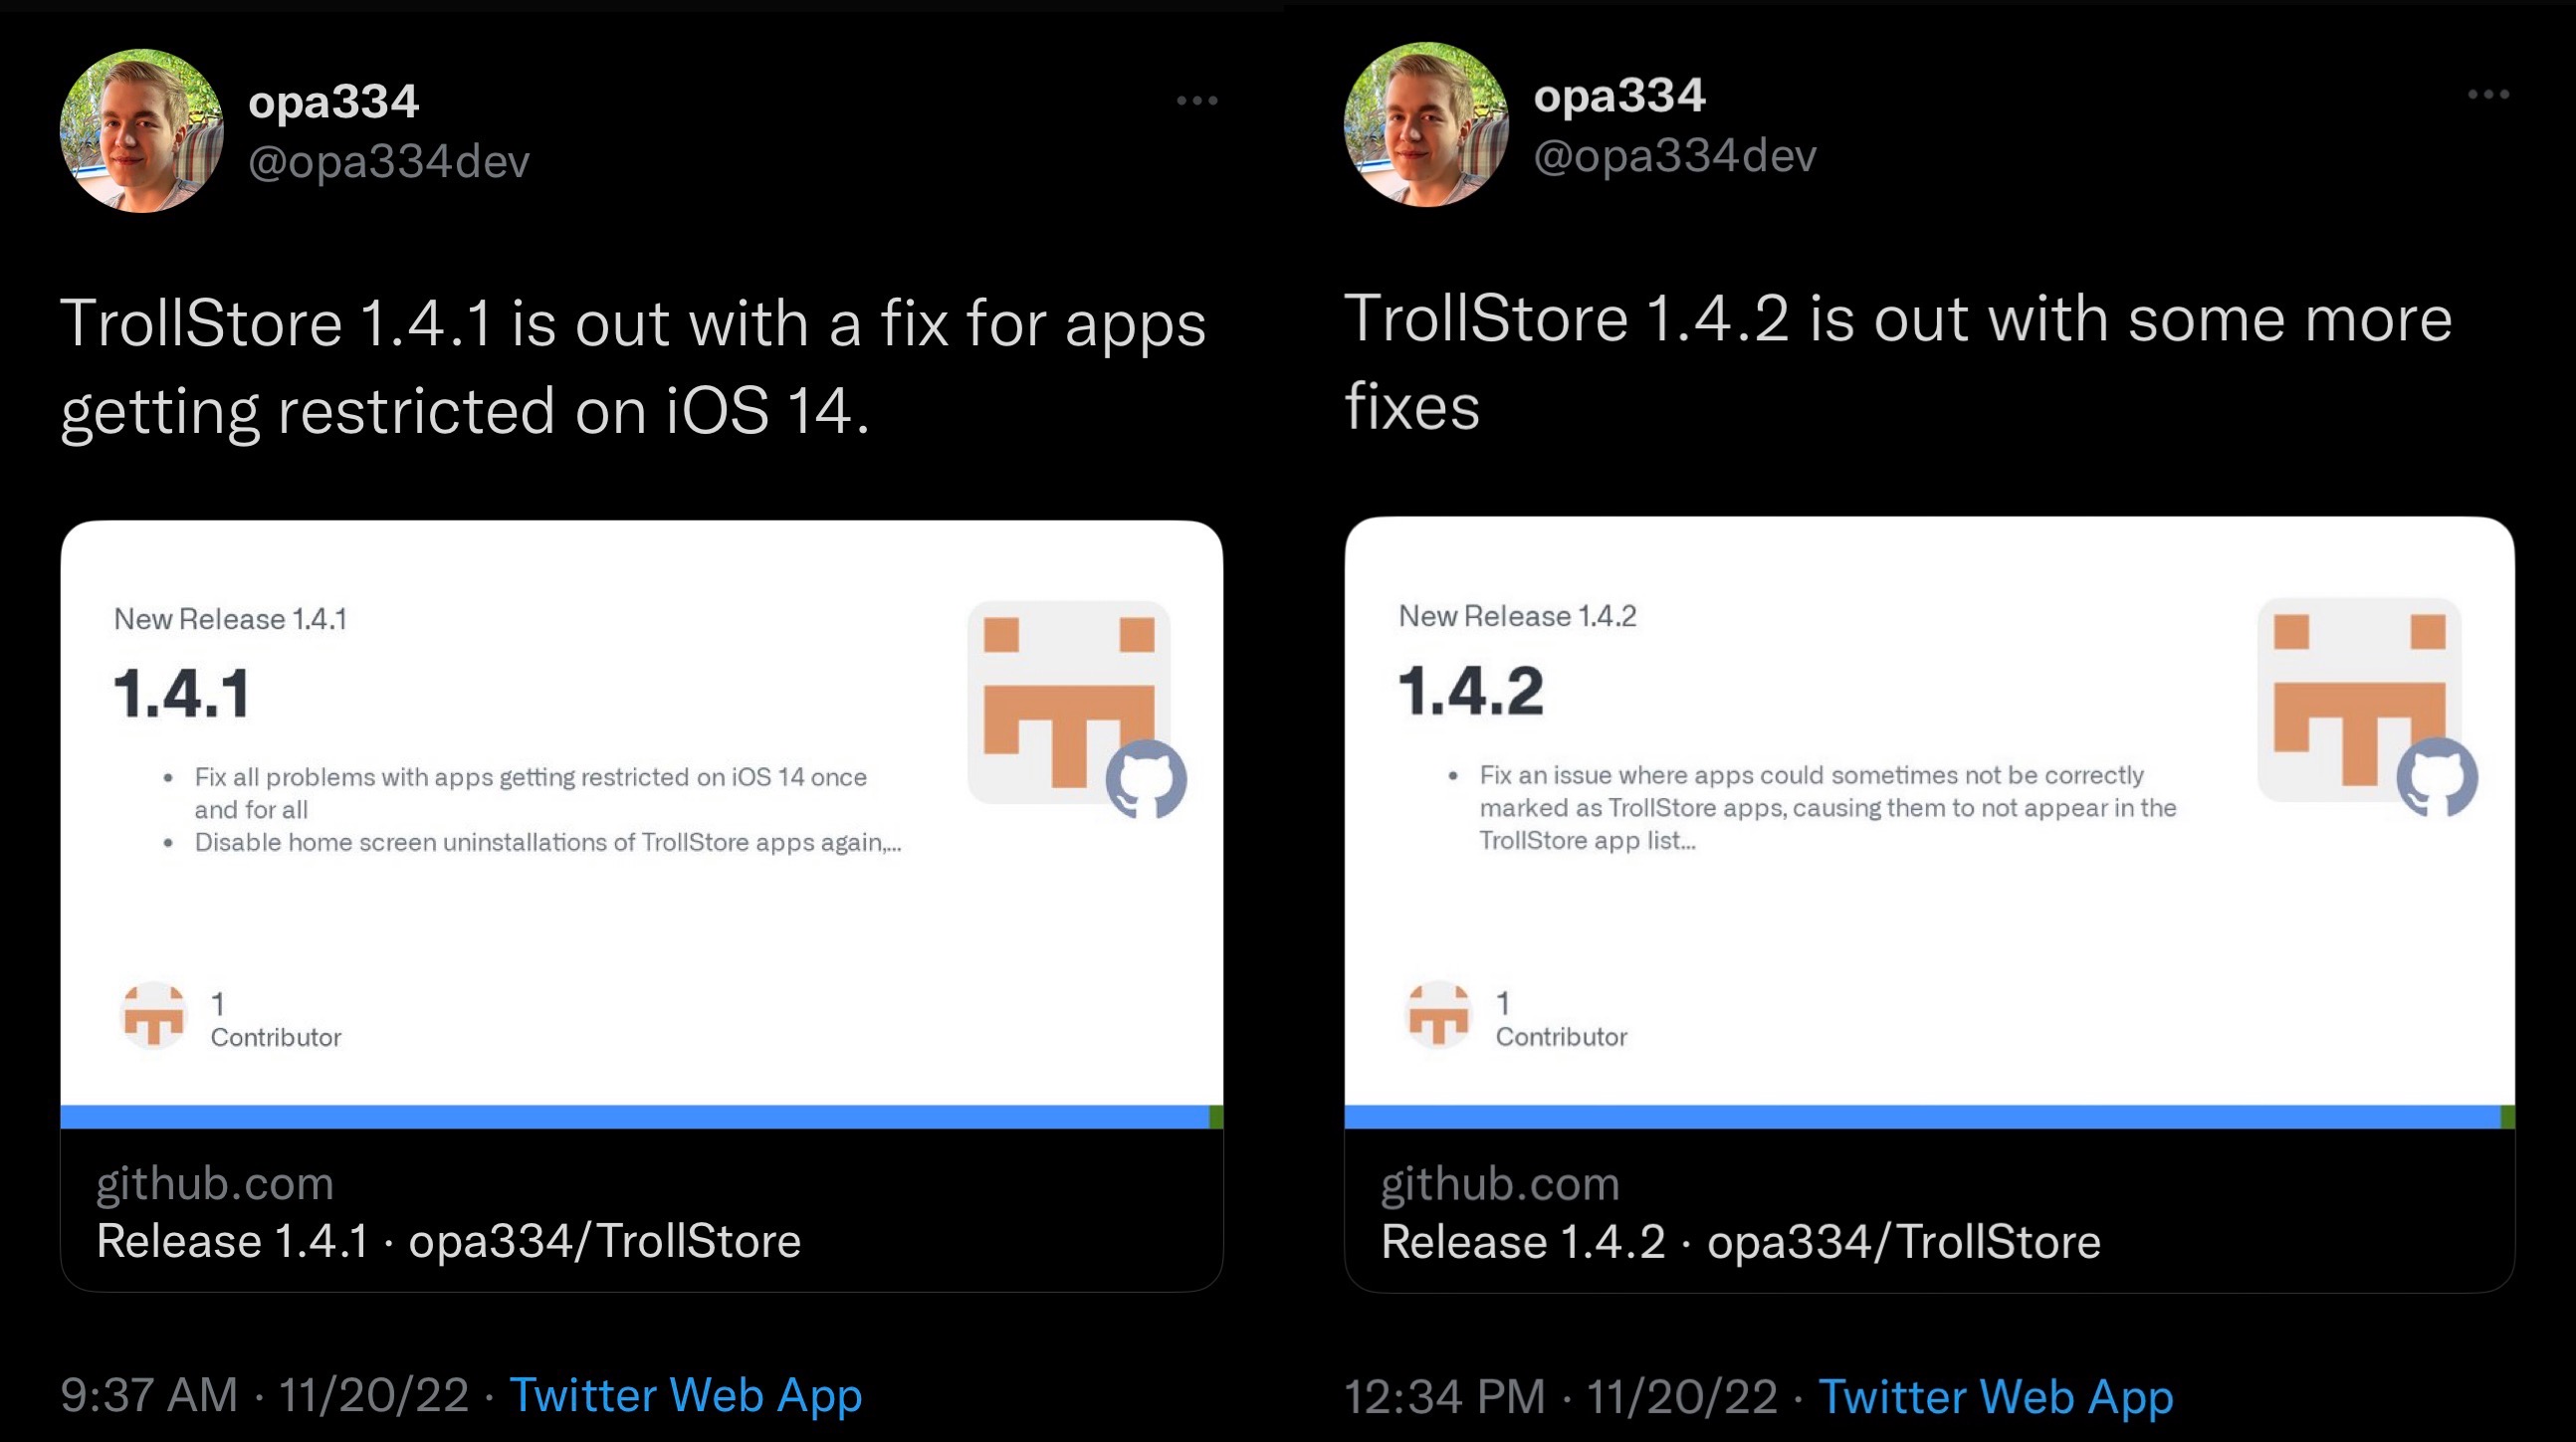 TrollStore versions 1.4.1 and 1.4.2 released